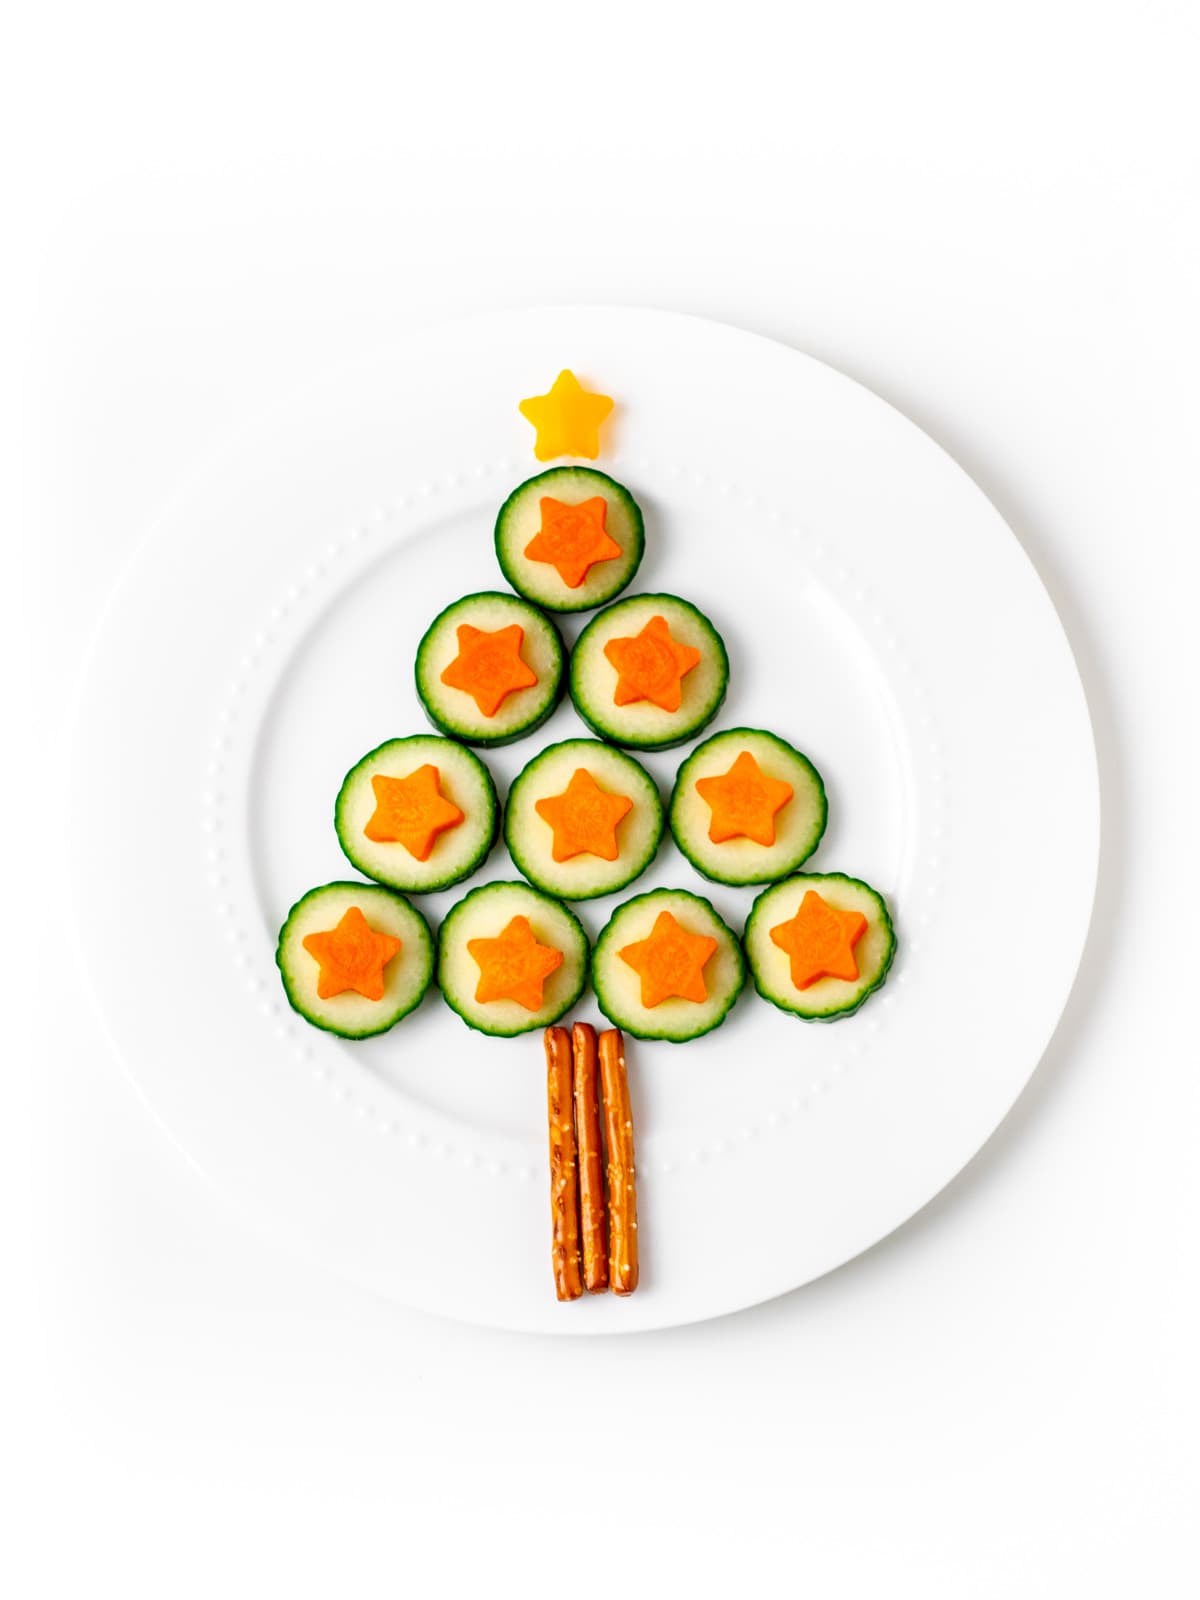 Cucumber Christmas tree with carrot stars, pretzel trunk and yellow bellow pepper star on top.